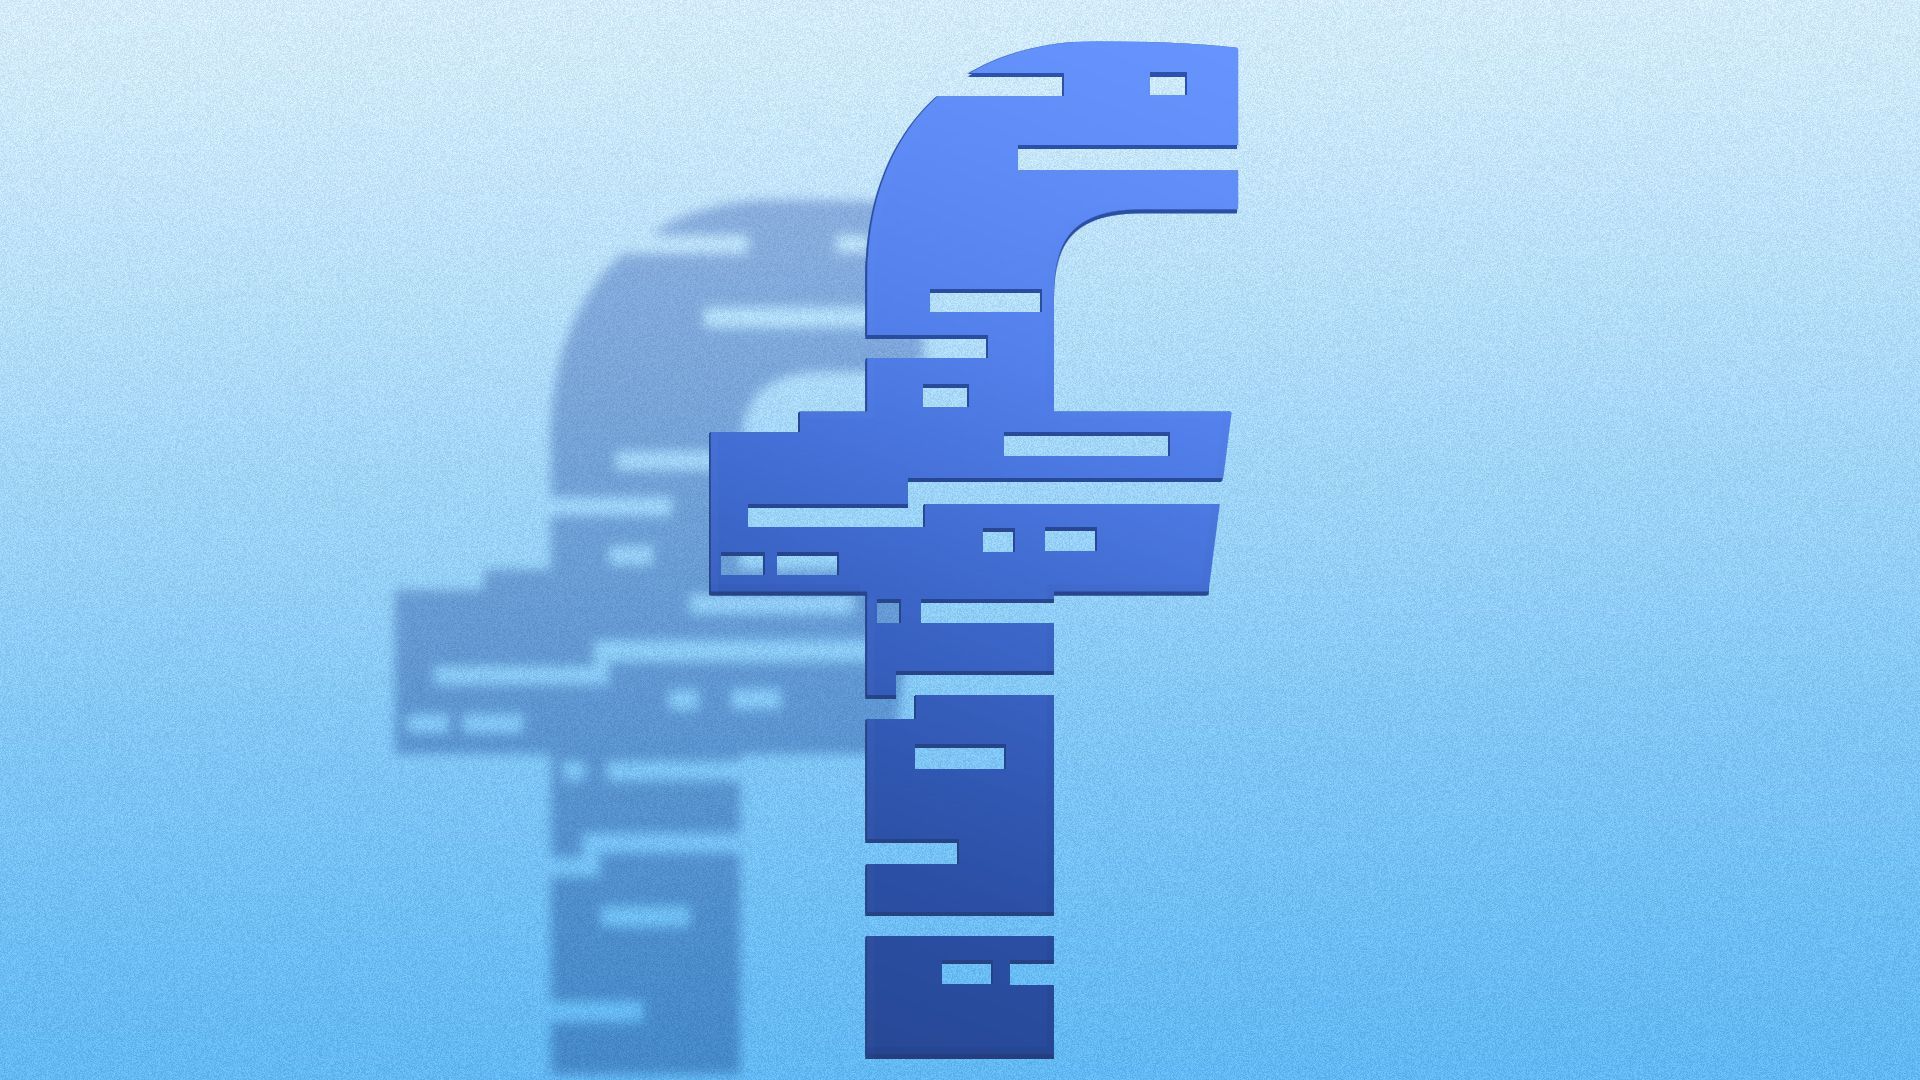 Illustration of the Facebook logo with pieces removed as though they are redacted lines of a document